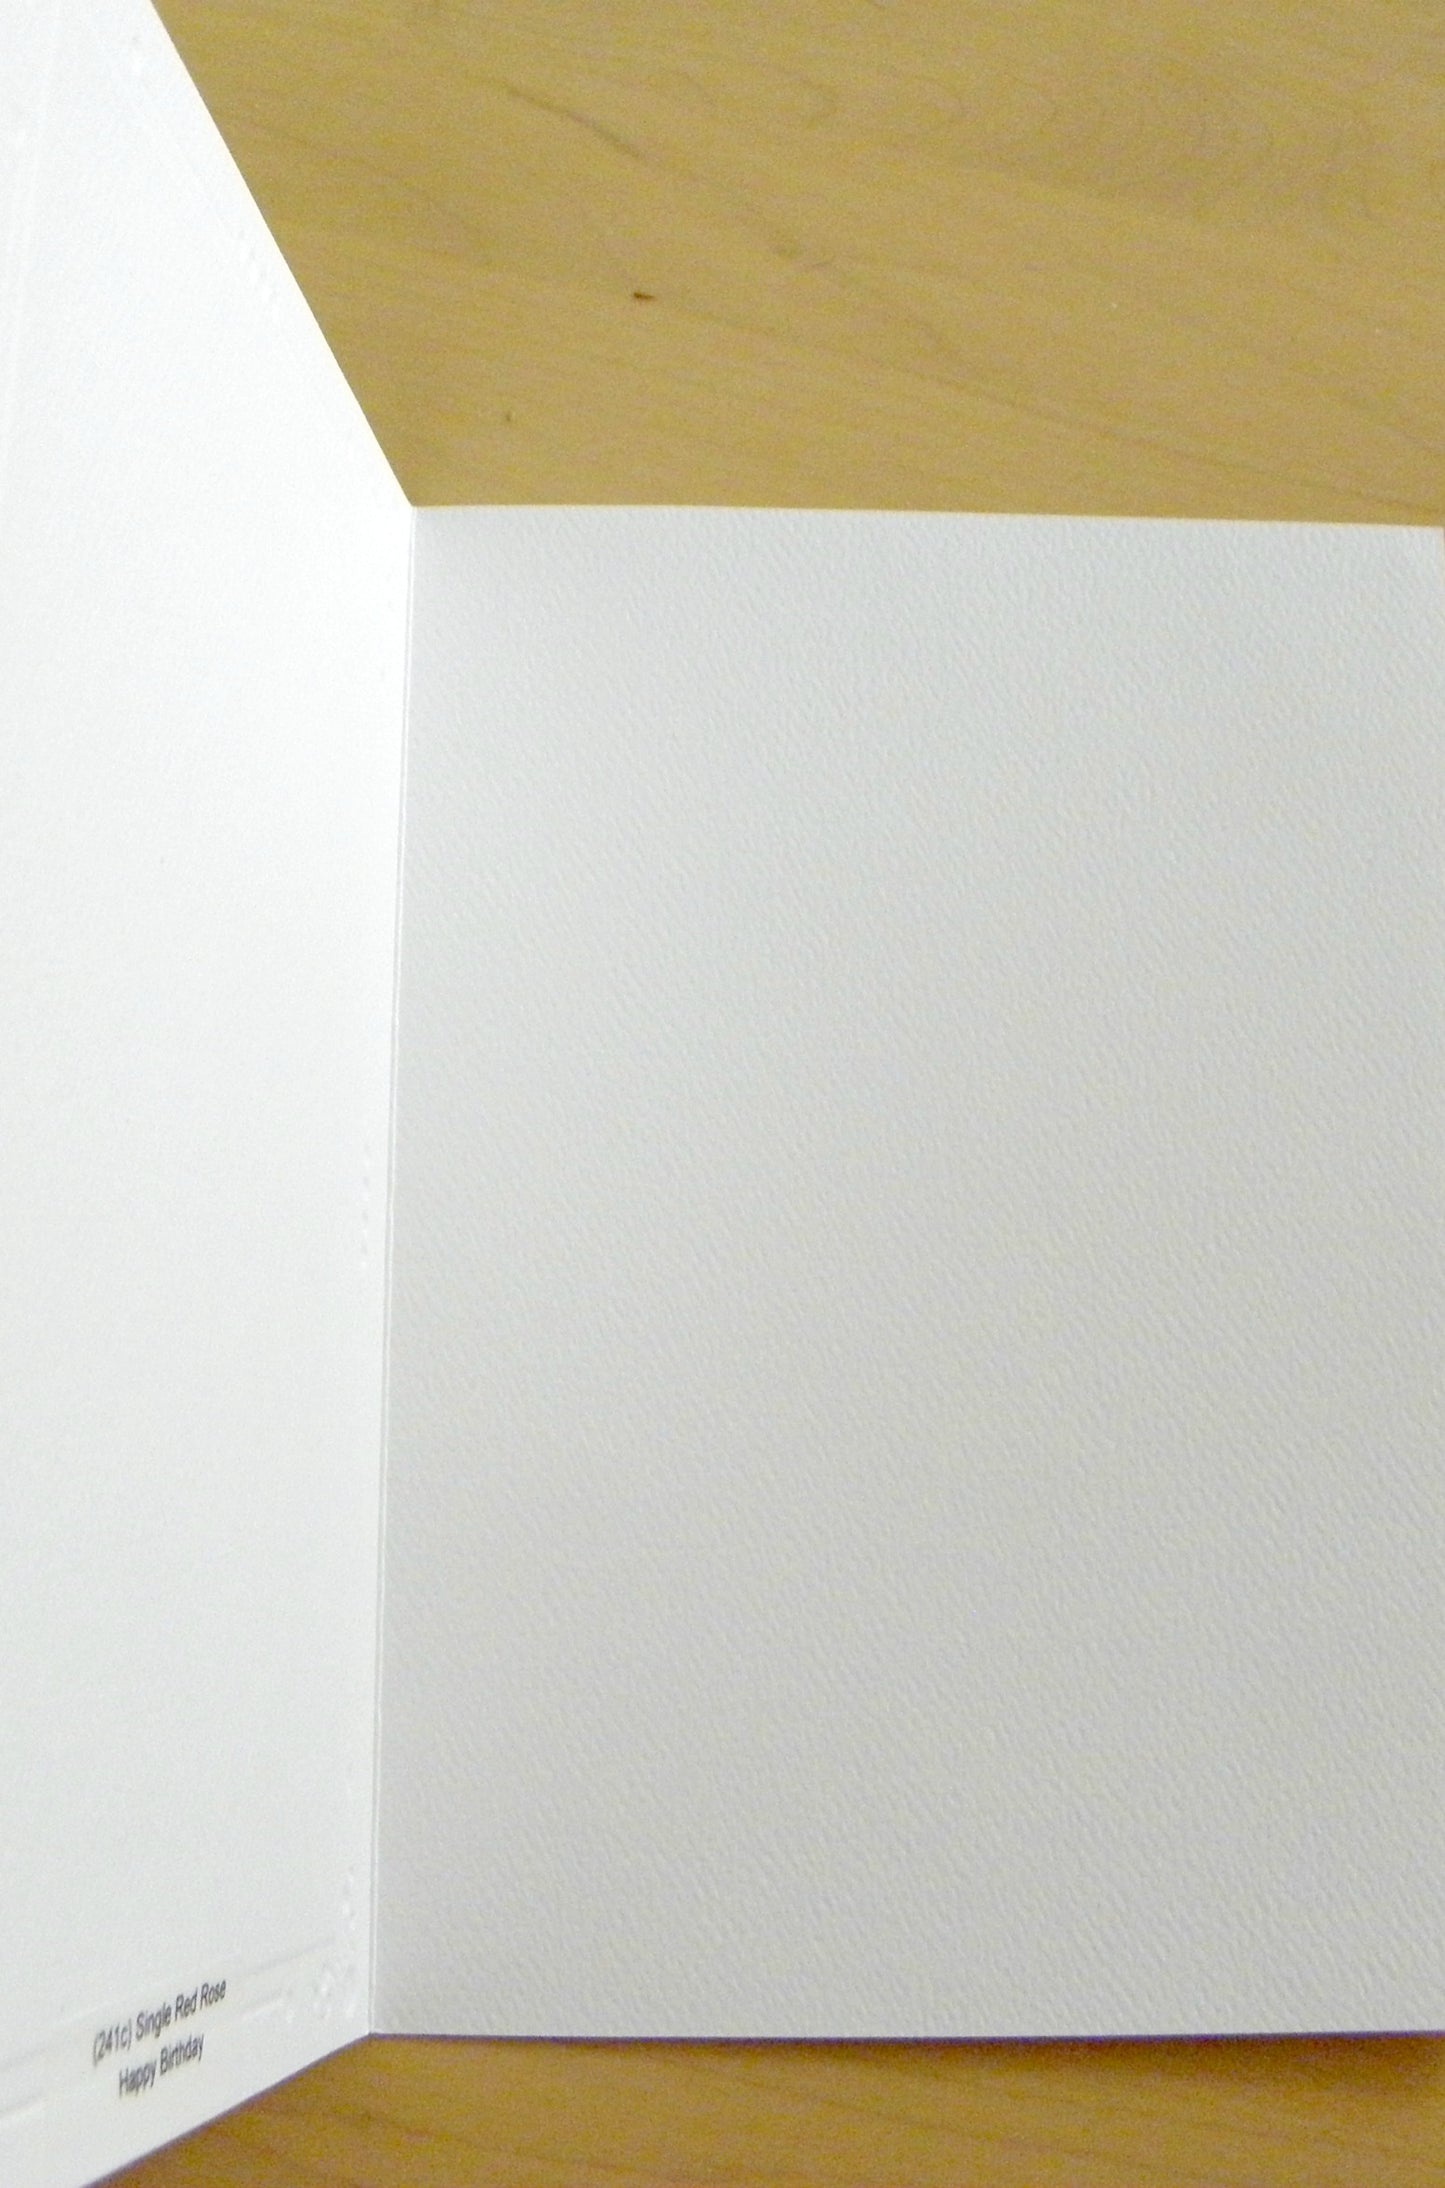 Photo of the inside of the Blank Maid-of-Honor Card